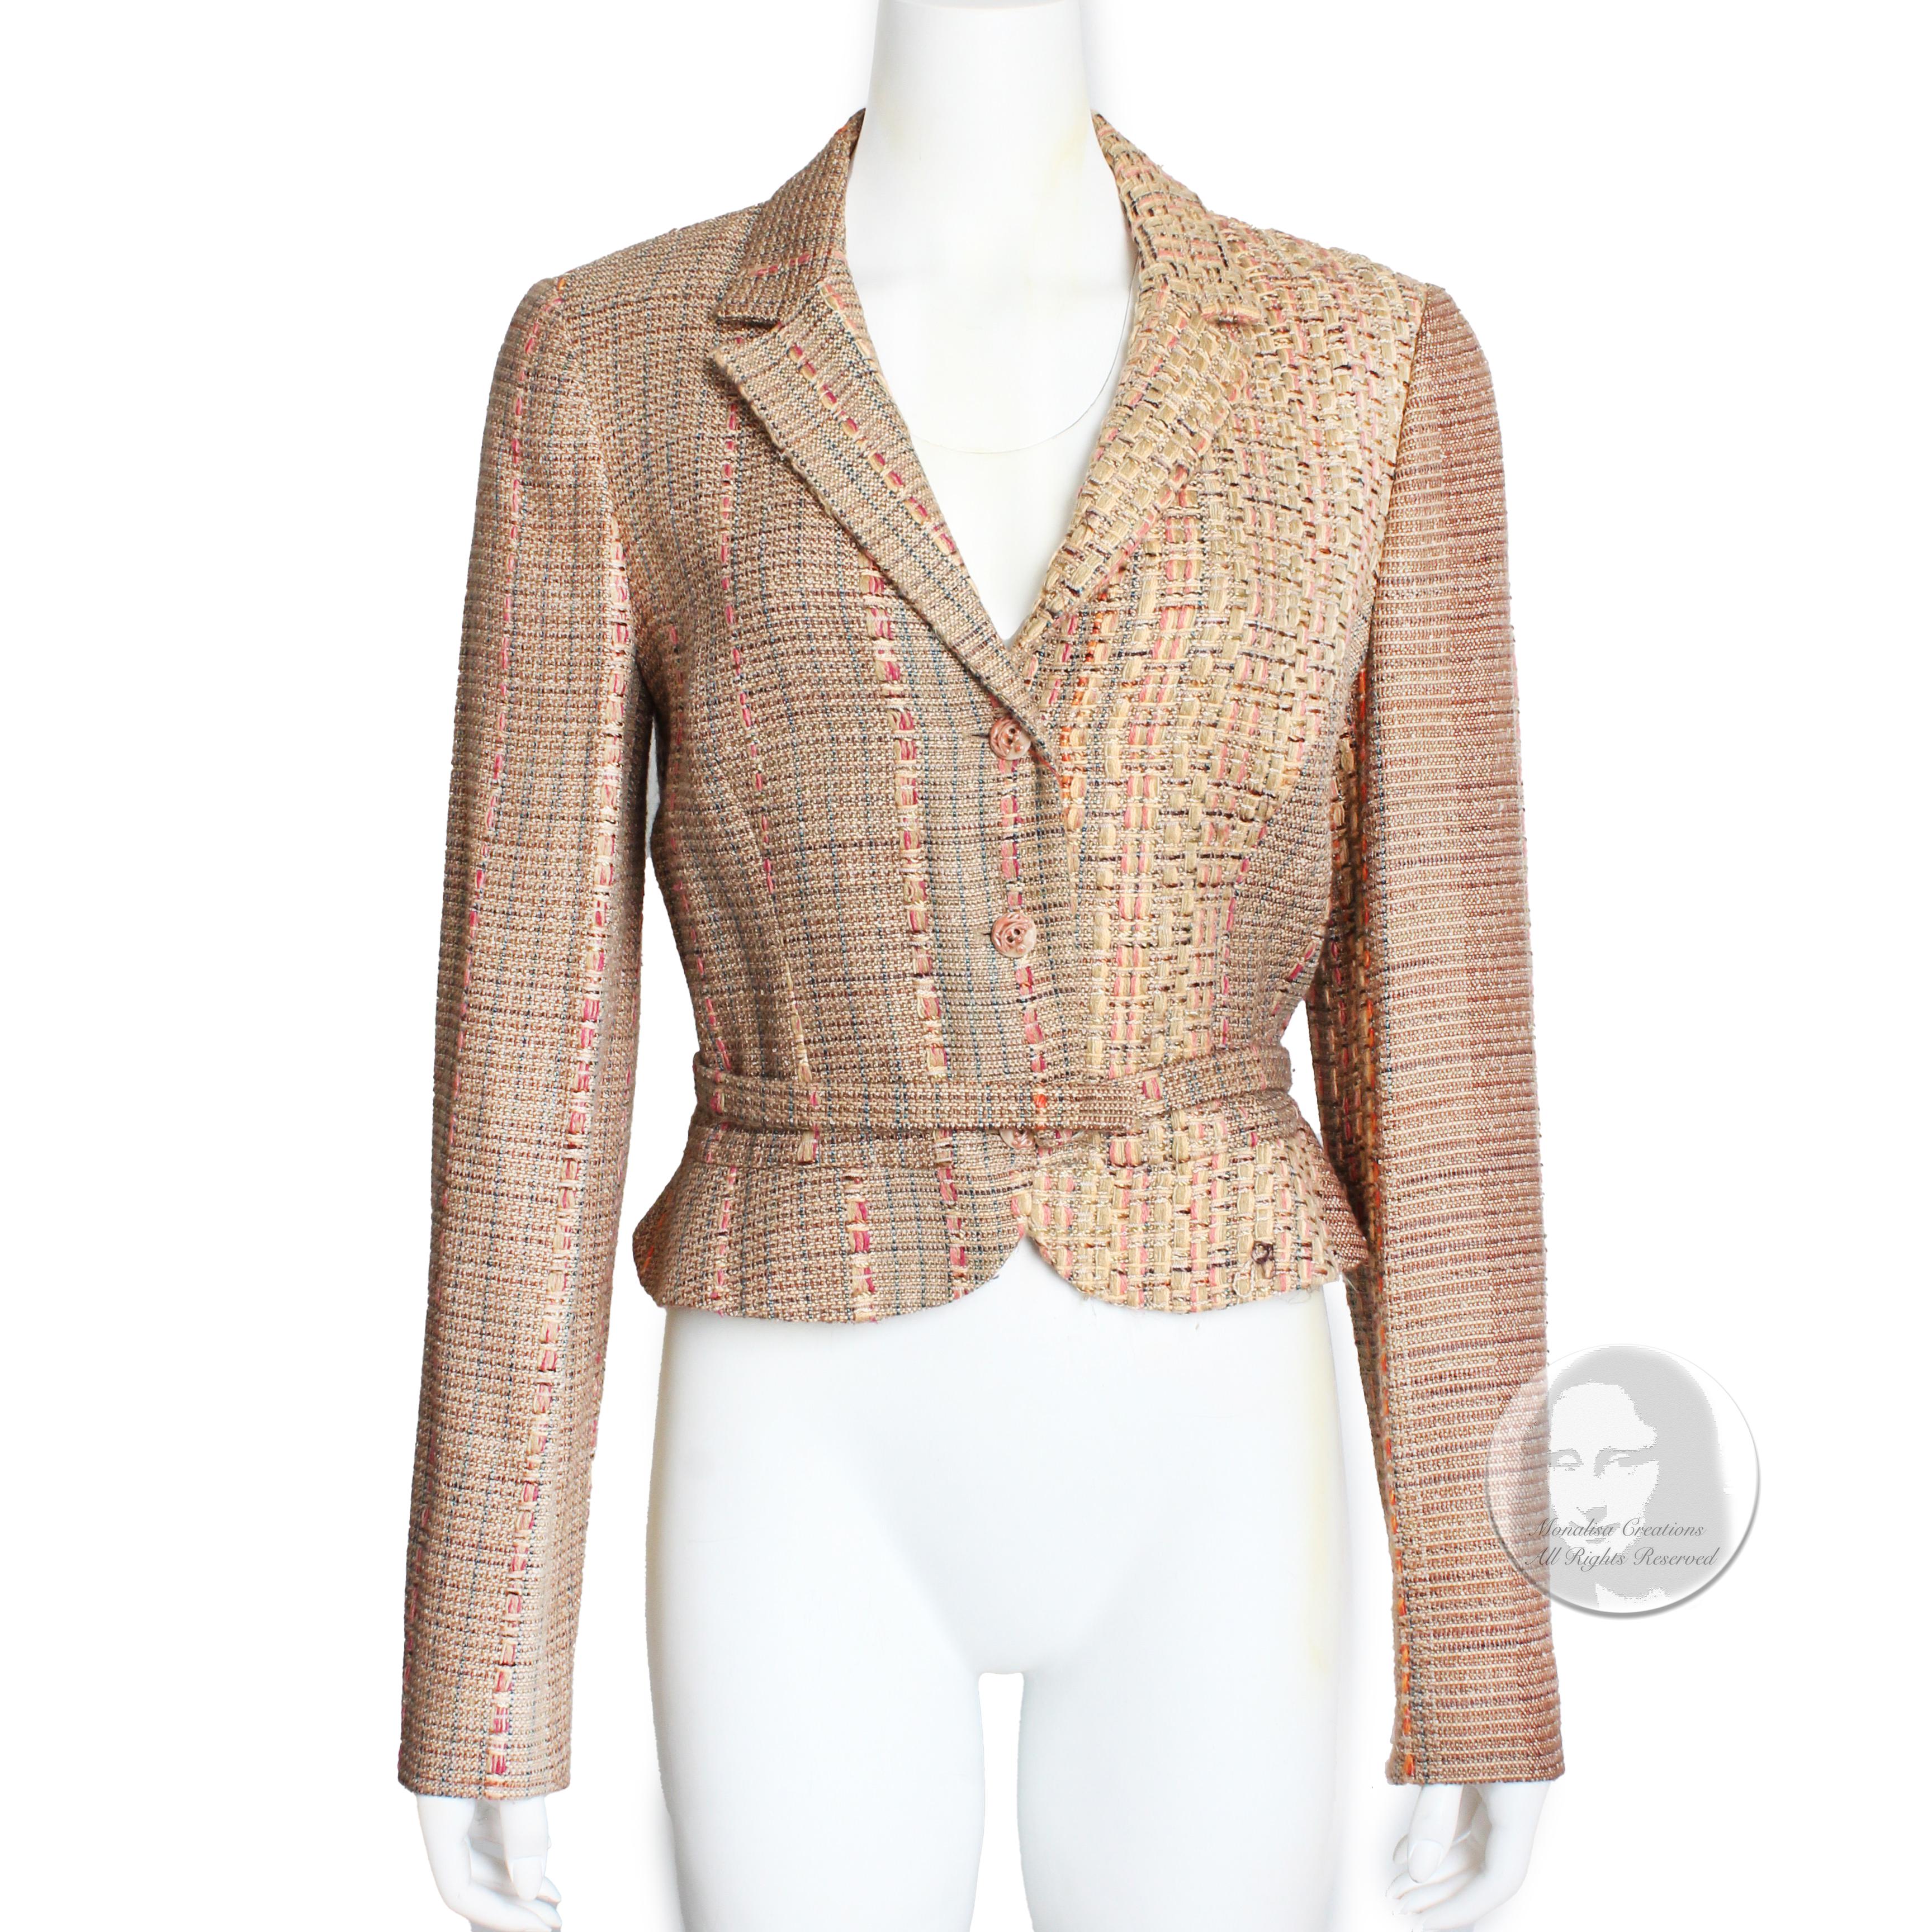 Authentic, preowned, vintage Christian Lacroix silk/wool blend tweed cropped jacket with belt, likely made in the early 2000s. Made from a pretty silk/wool blend tweed, this textural jacket is cropped, fastens with decorative buttons, and comes with